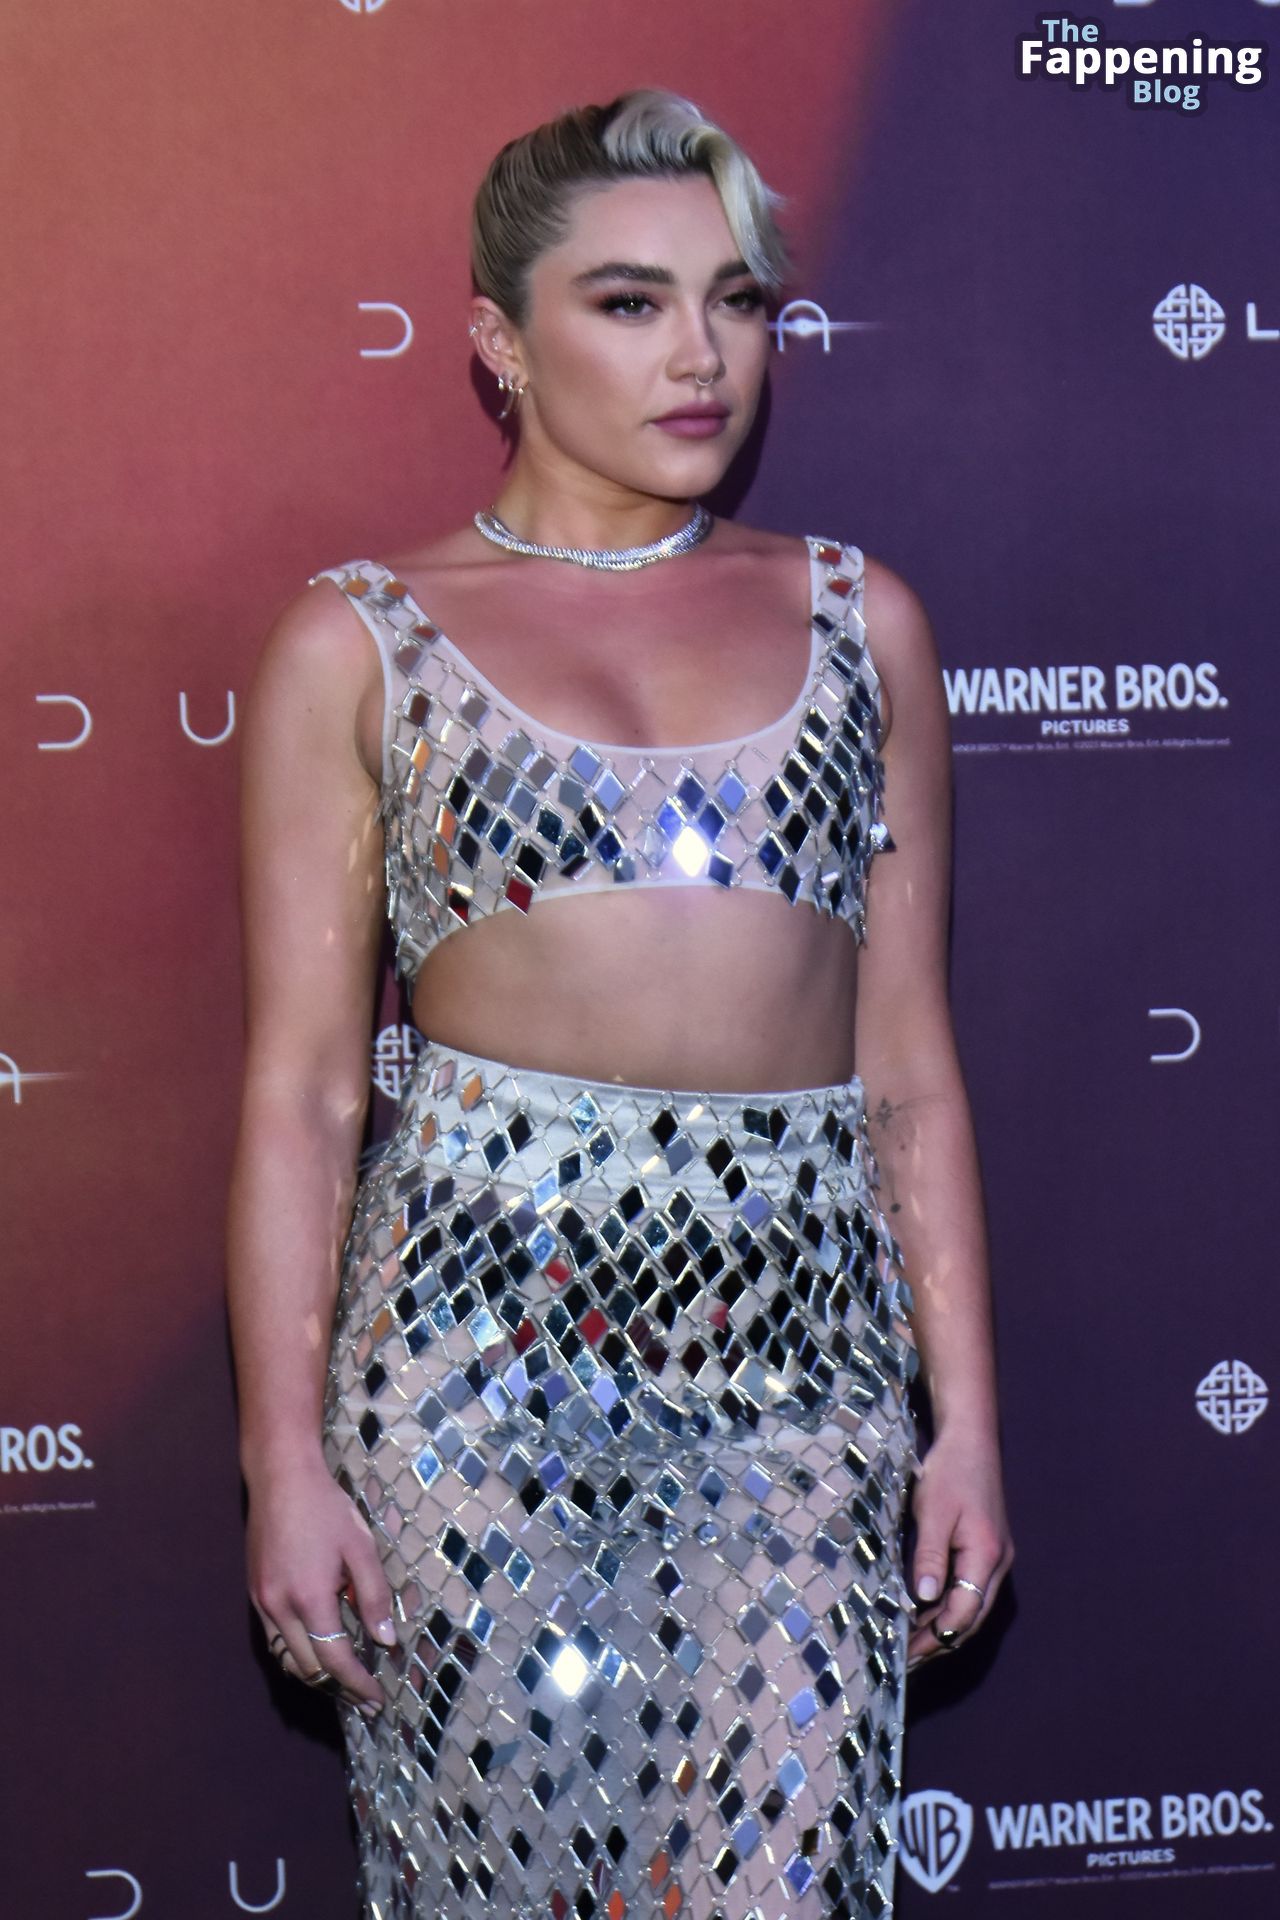 Florence-Pugh-Sexy-45-The-Fappening-Blog.jpg